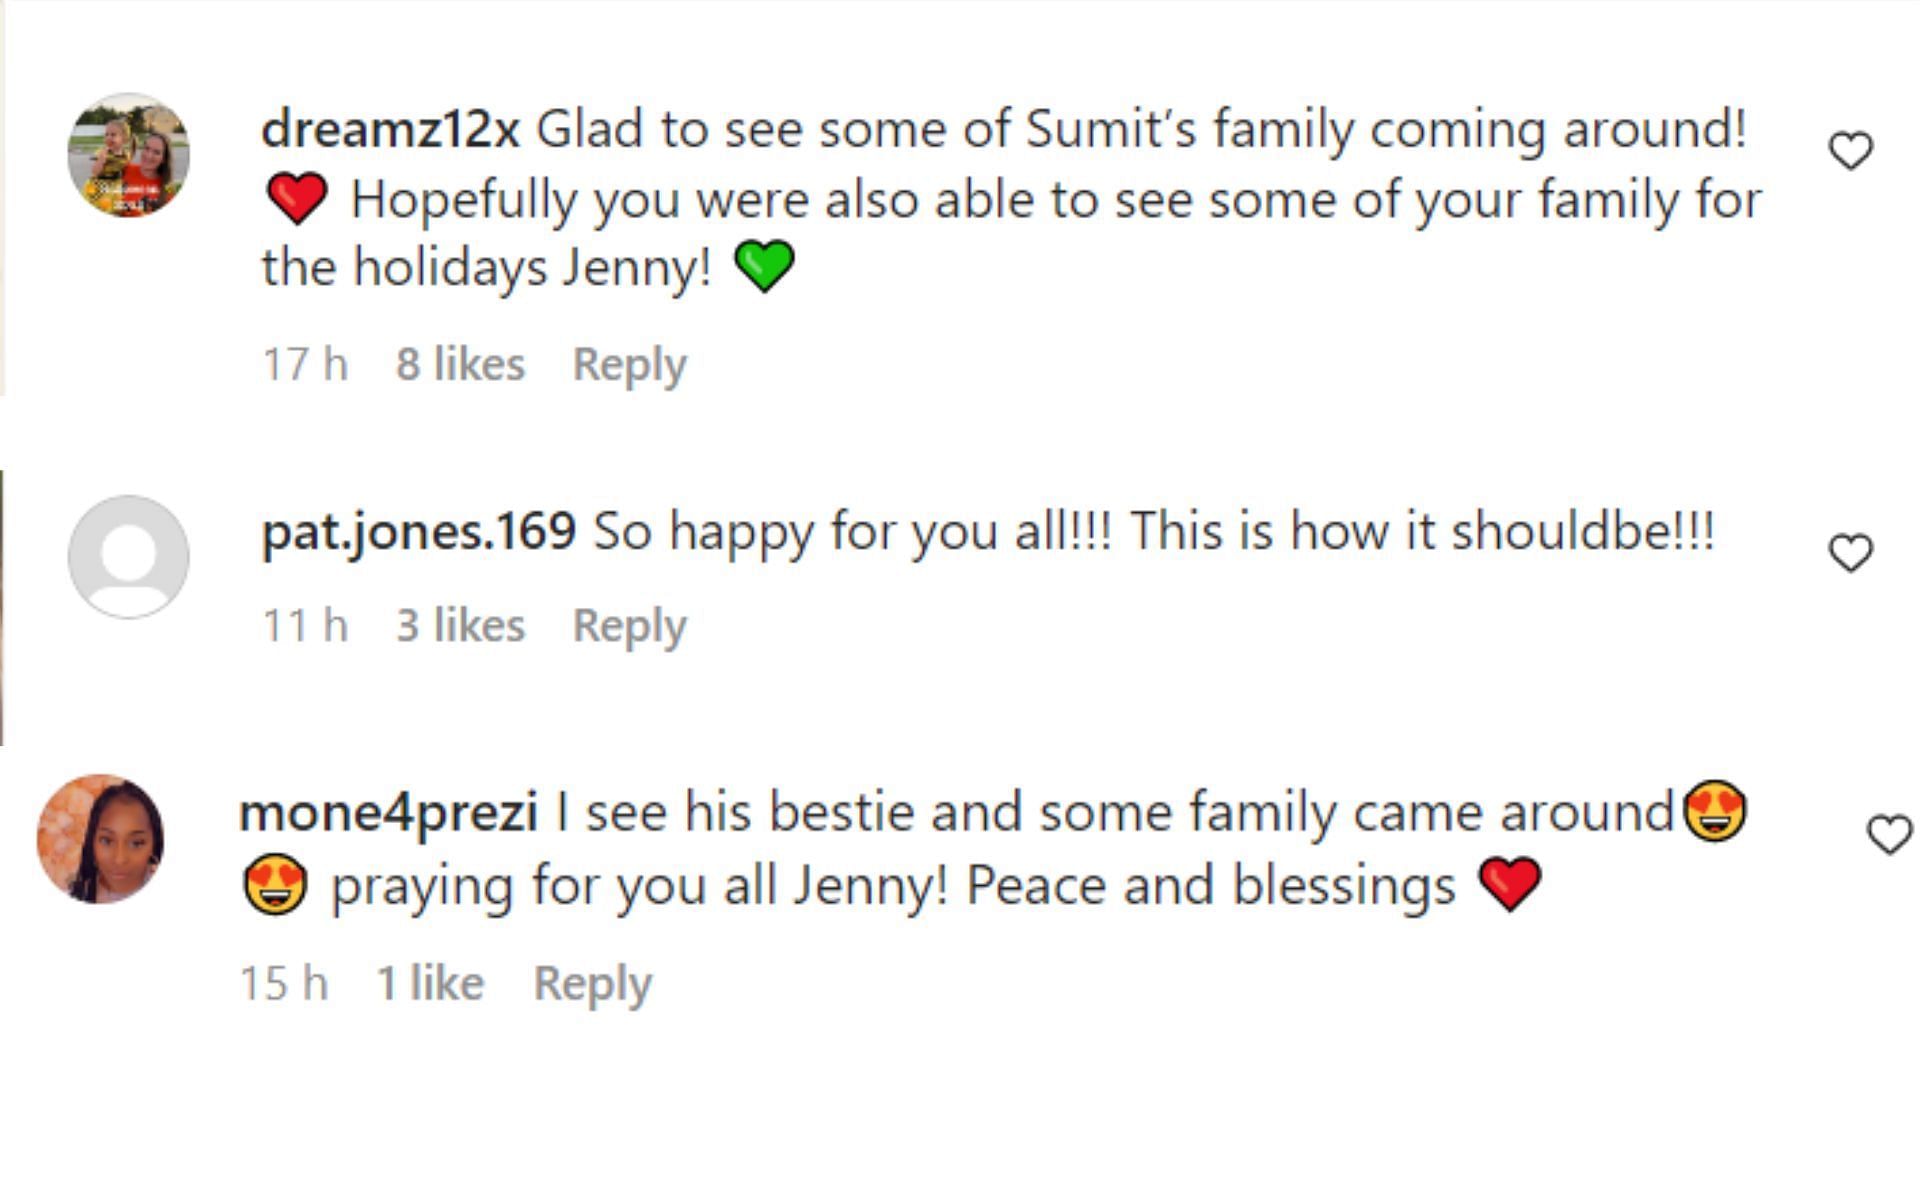 Fans are happy to see the couple getting accepted by the family (Images via sumitjenny/ Instagram)